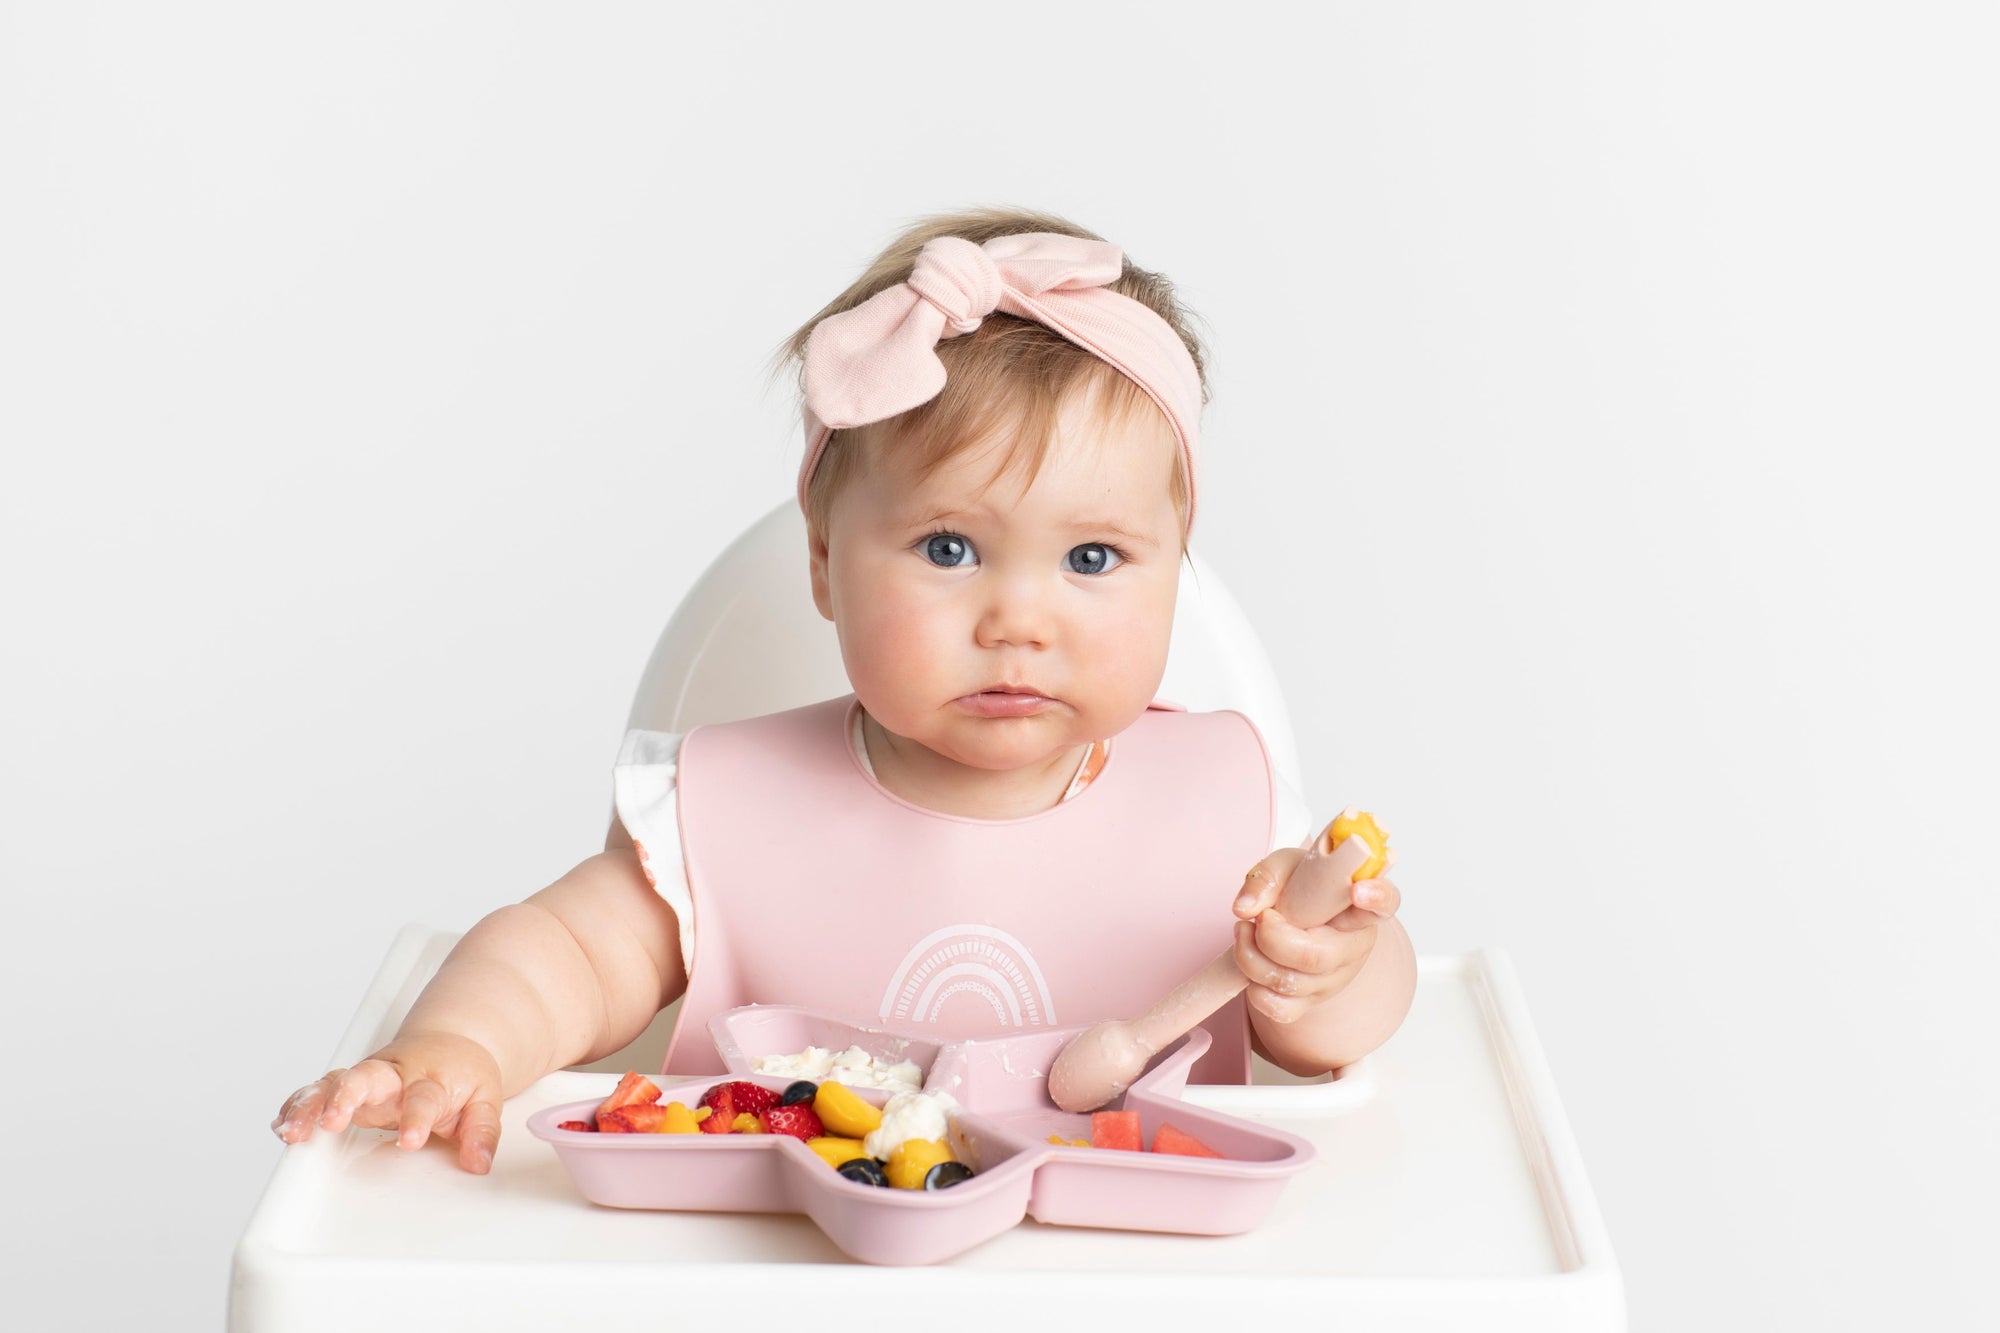 Starting Solids: Traditional Feeding or Baby Led Weaning?